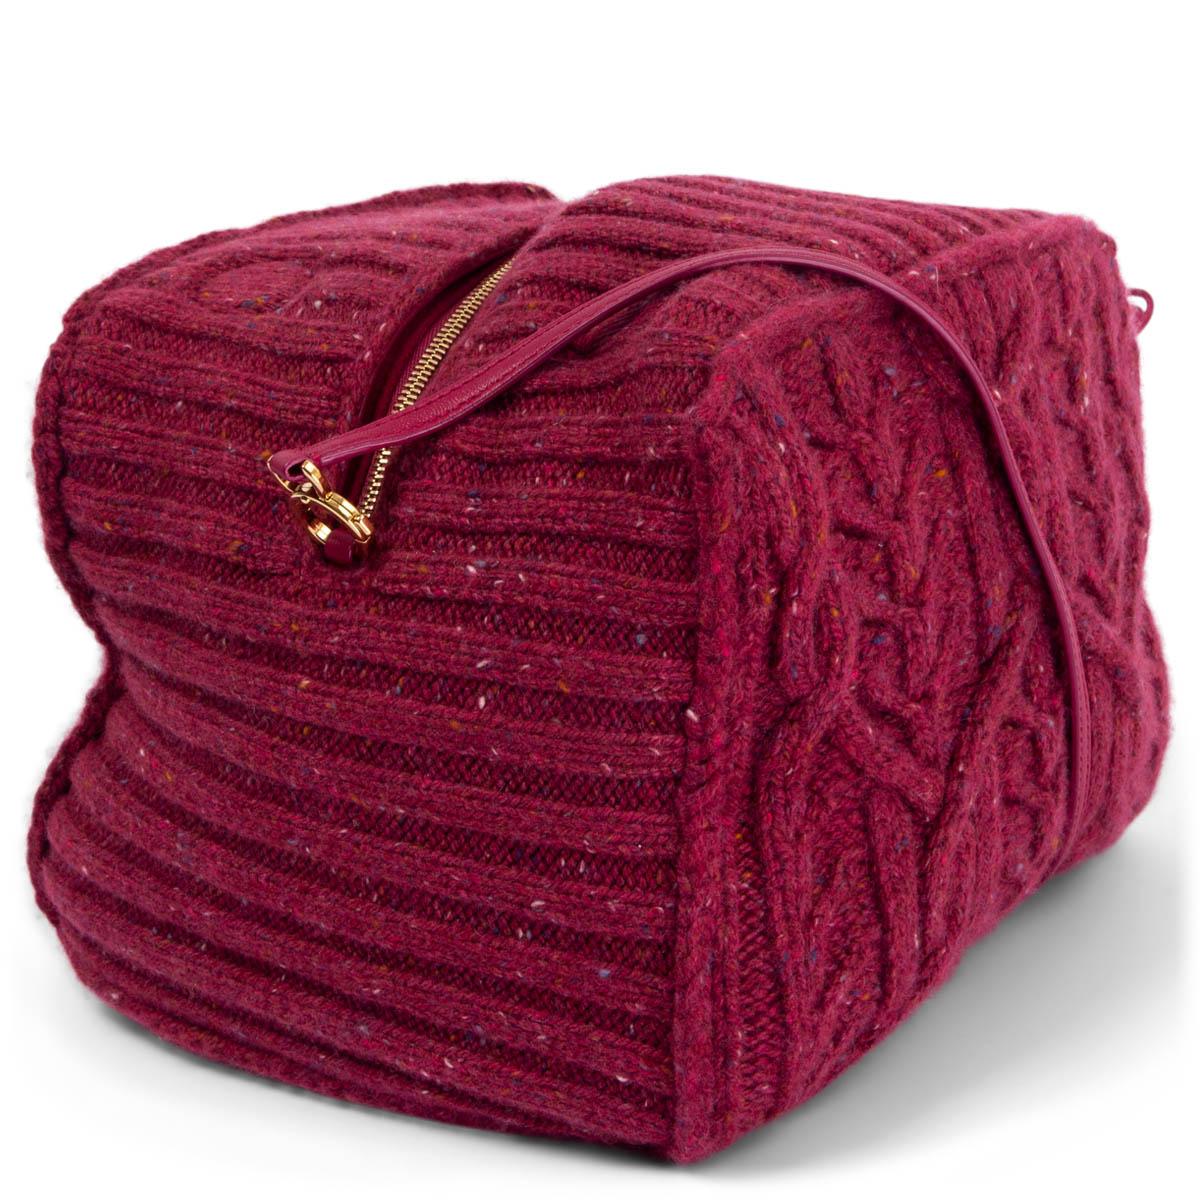 100% authentic Loro Piana Puffy Pouch in Fantasy Regalia Red (raspberry red) speckled cashmere knit with cable stitches, and trimmed with artisanal wood beading. For easy access to your essentials, leave the top zip open and simply undo the magnetic